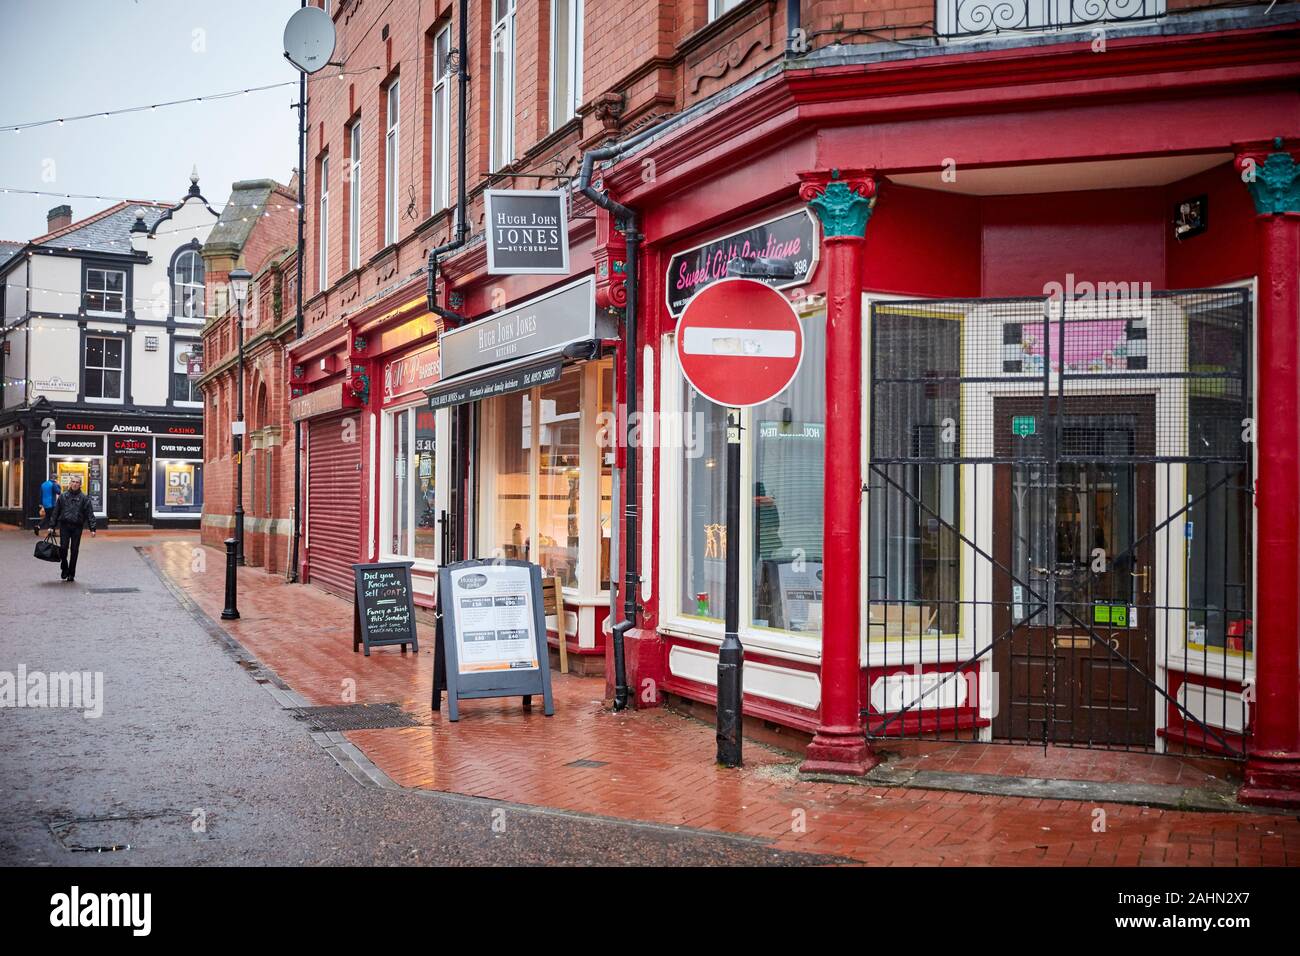 Wrexham in Wales, small independent shops in the town Stock Photo